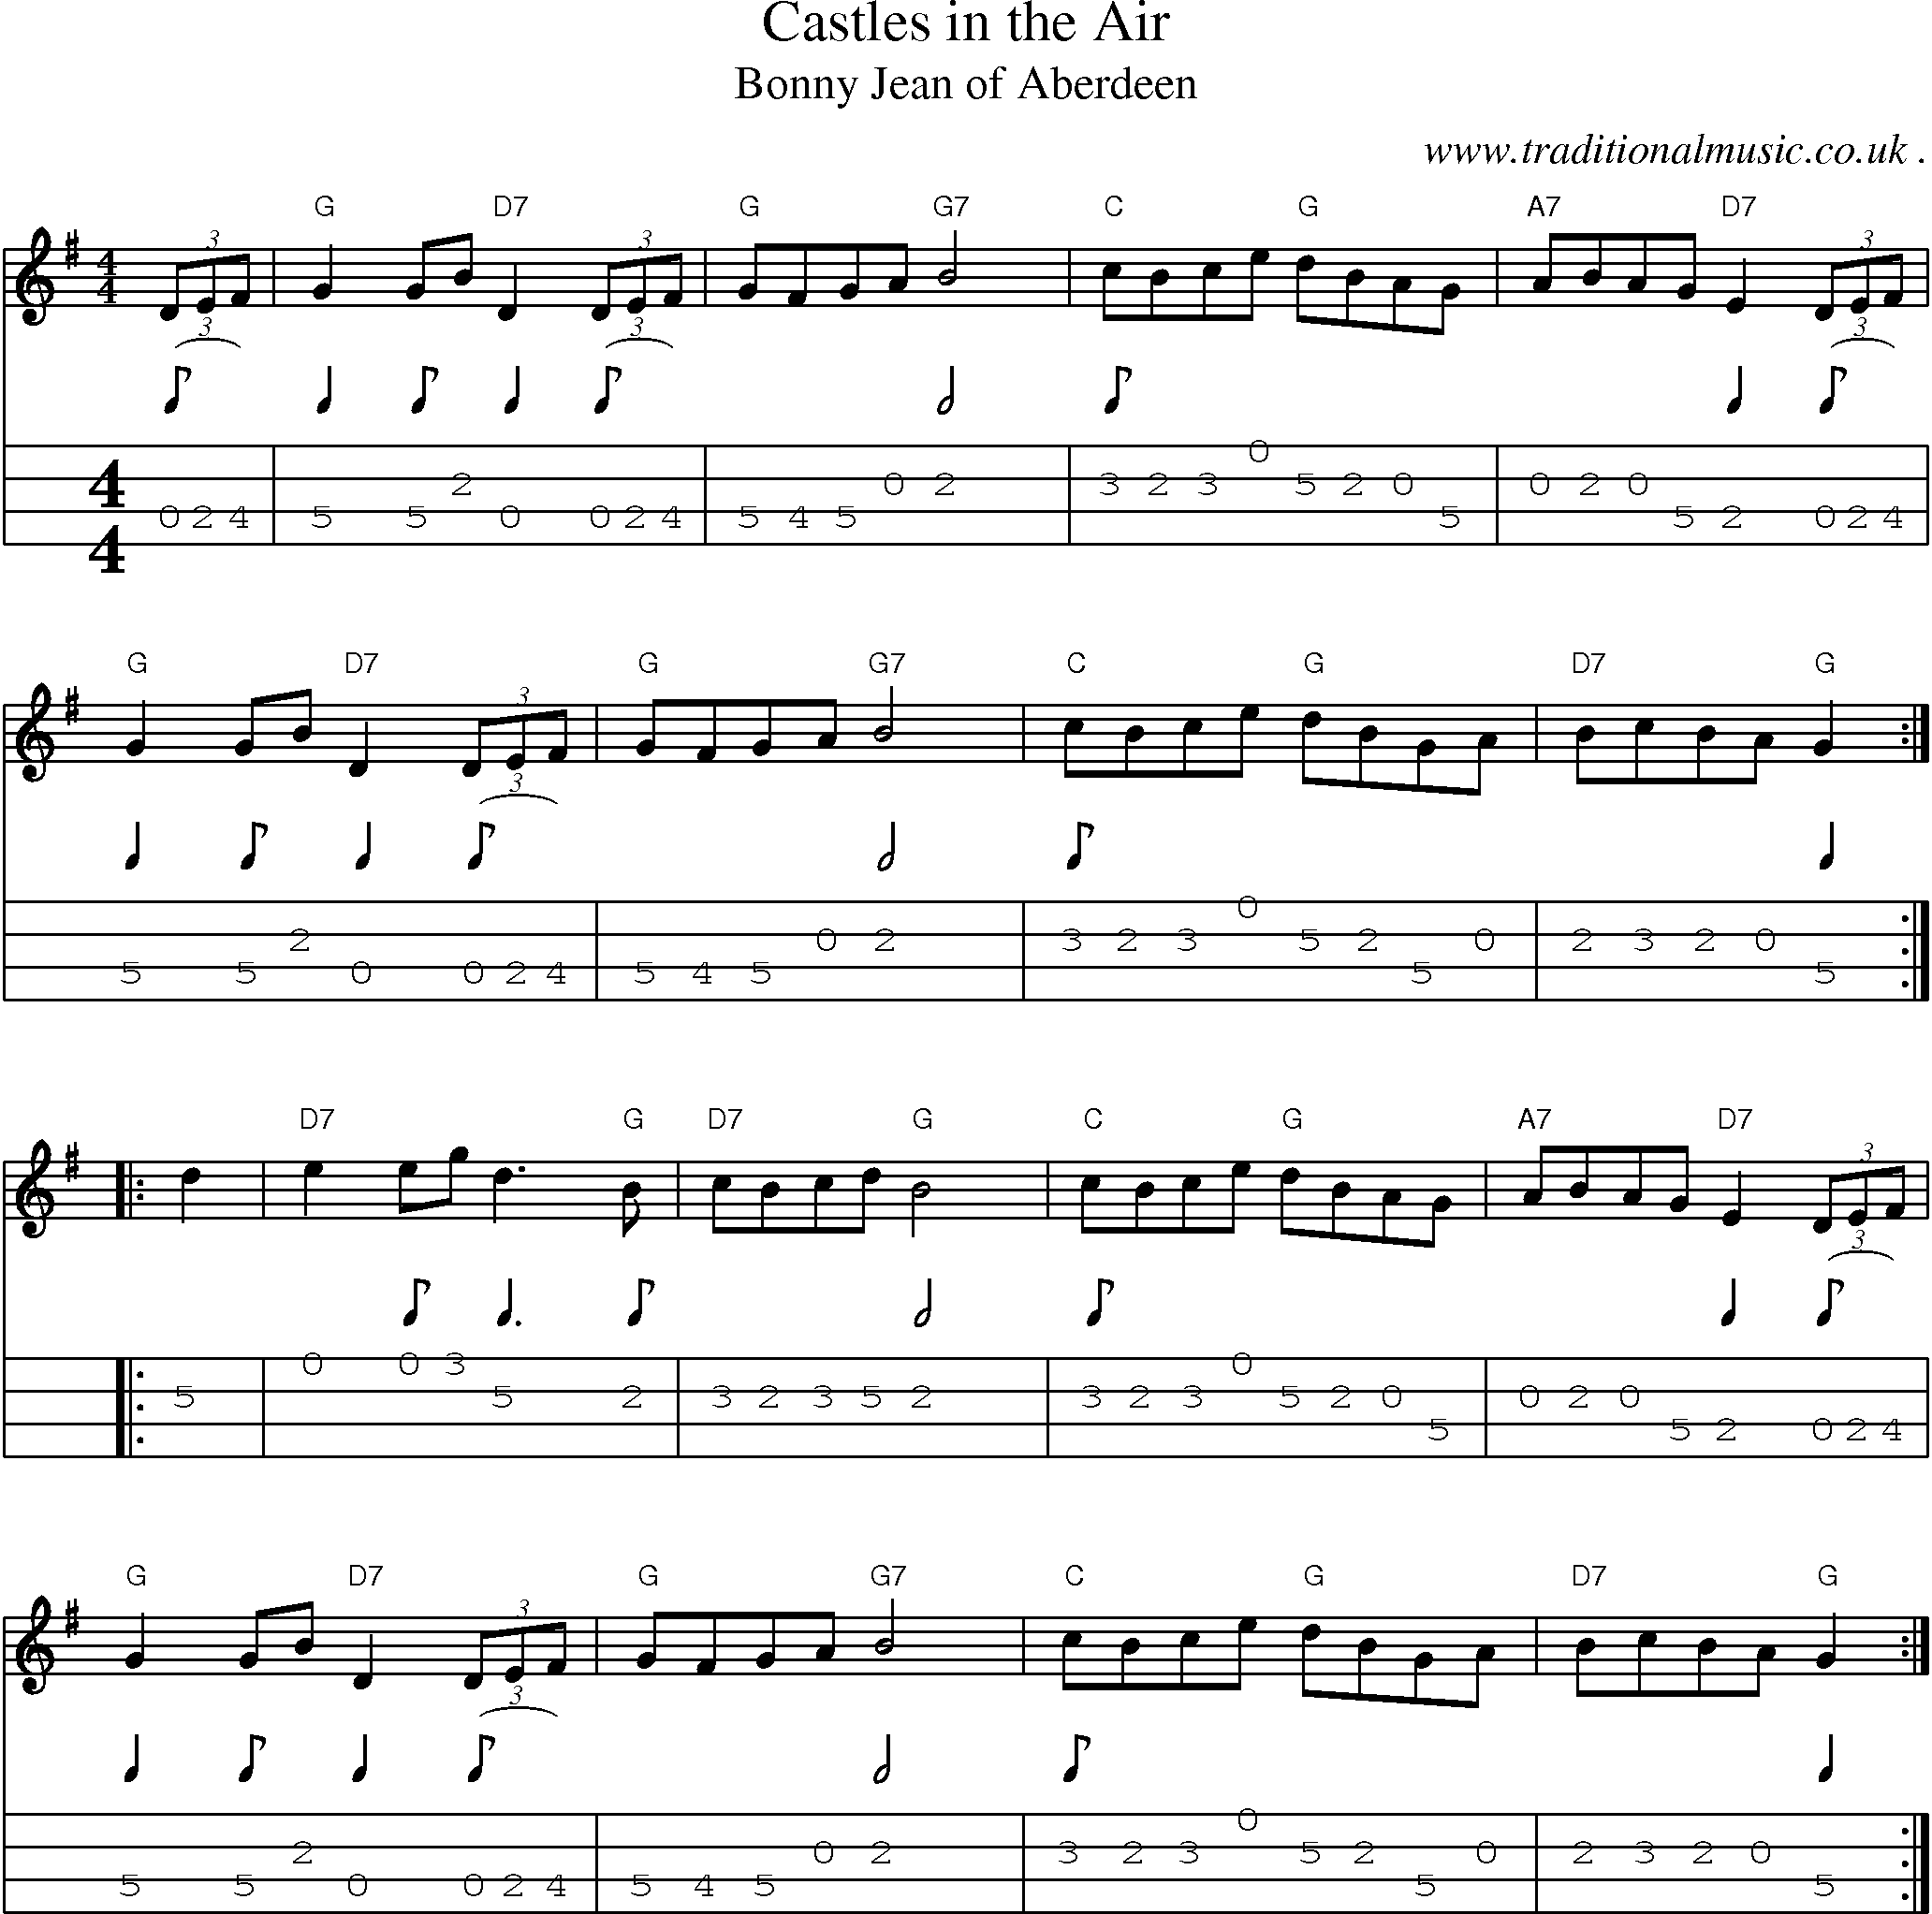 Music Score and Guitar Tabs for Castles in the Air